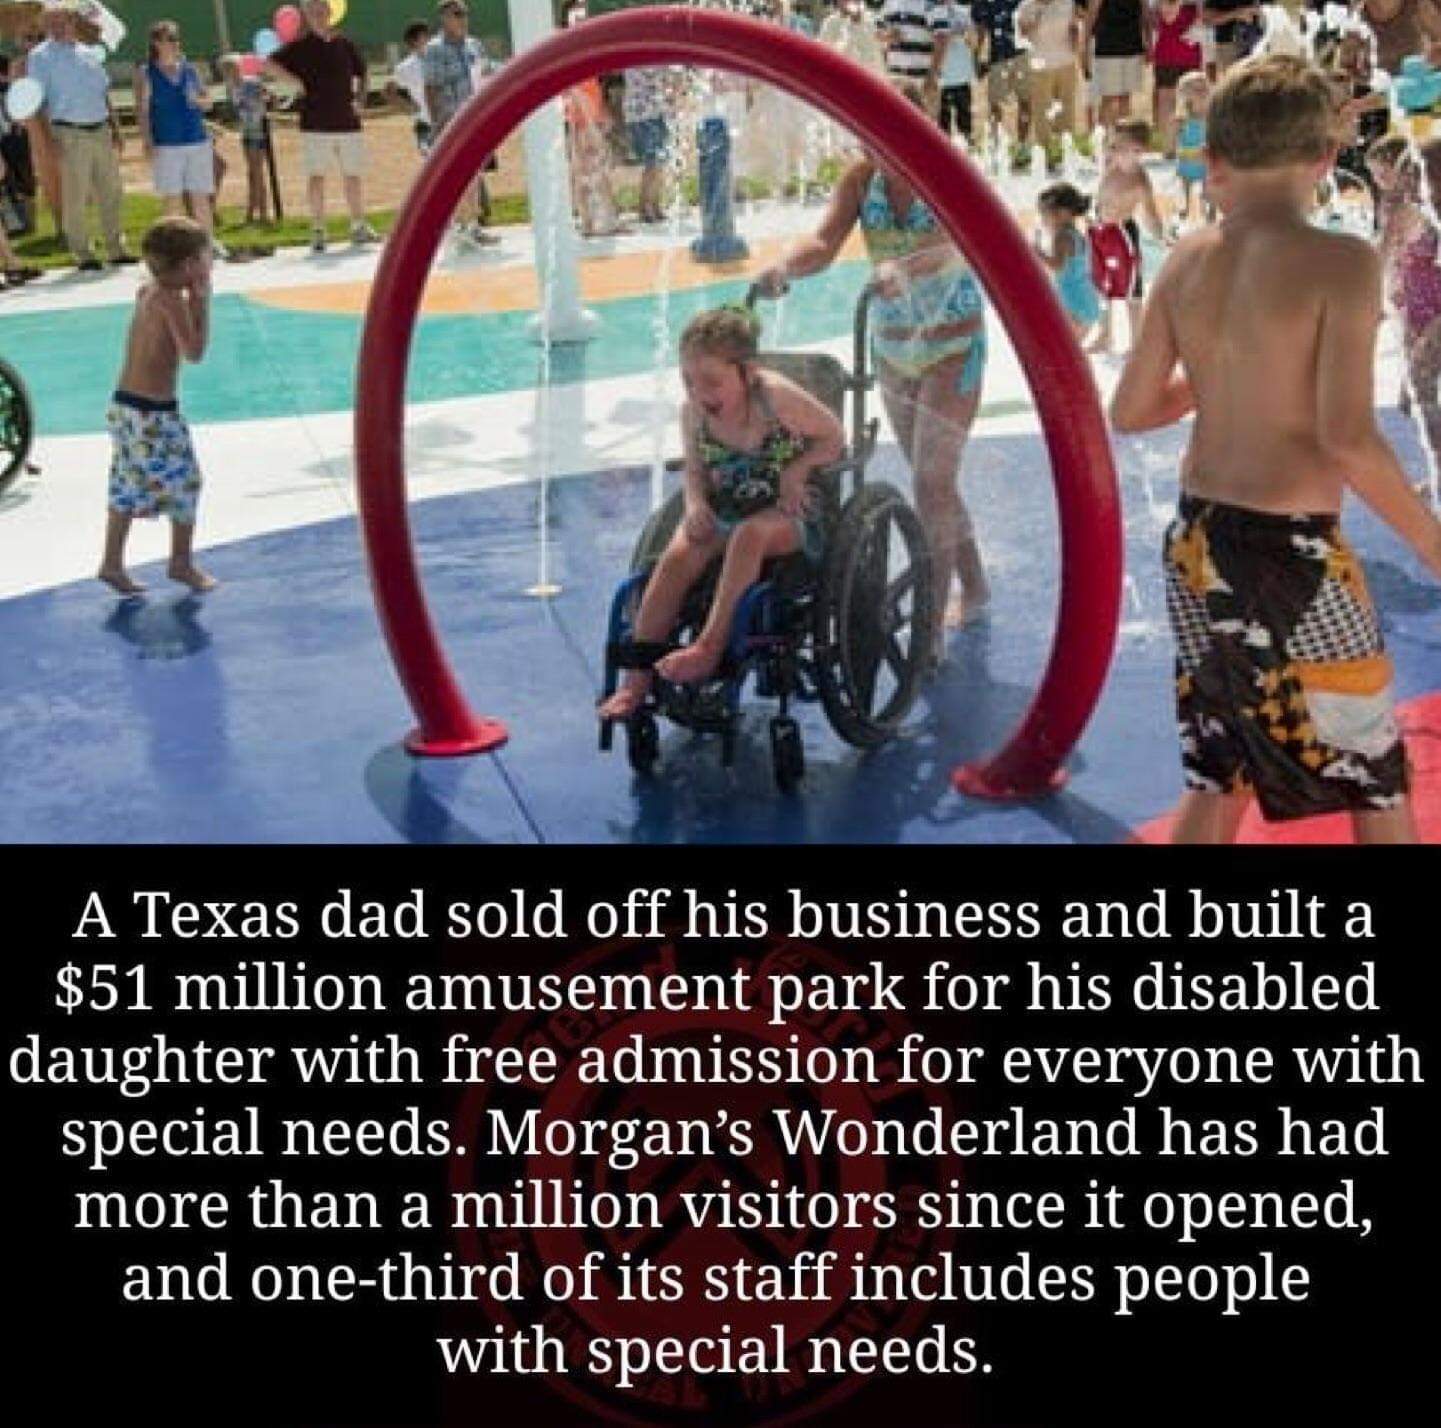 life - A Texas dad sold off his business and built a $51 million amusement park for his disabled daughter with free admission for everyone with special needs. Morgan's Wonderland has had more than a million visitors since it opened, and onethird of its st